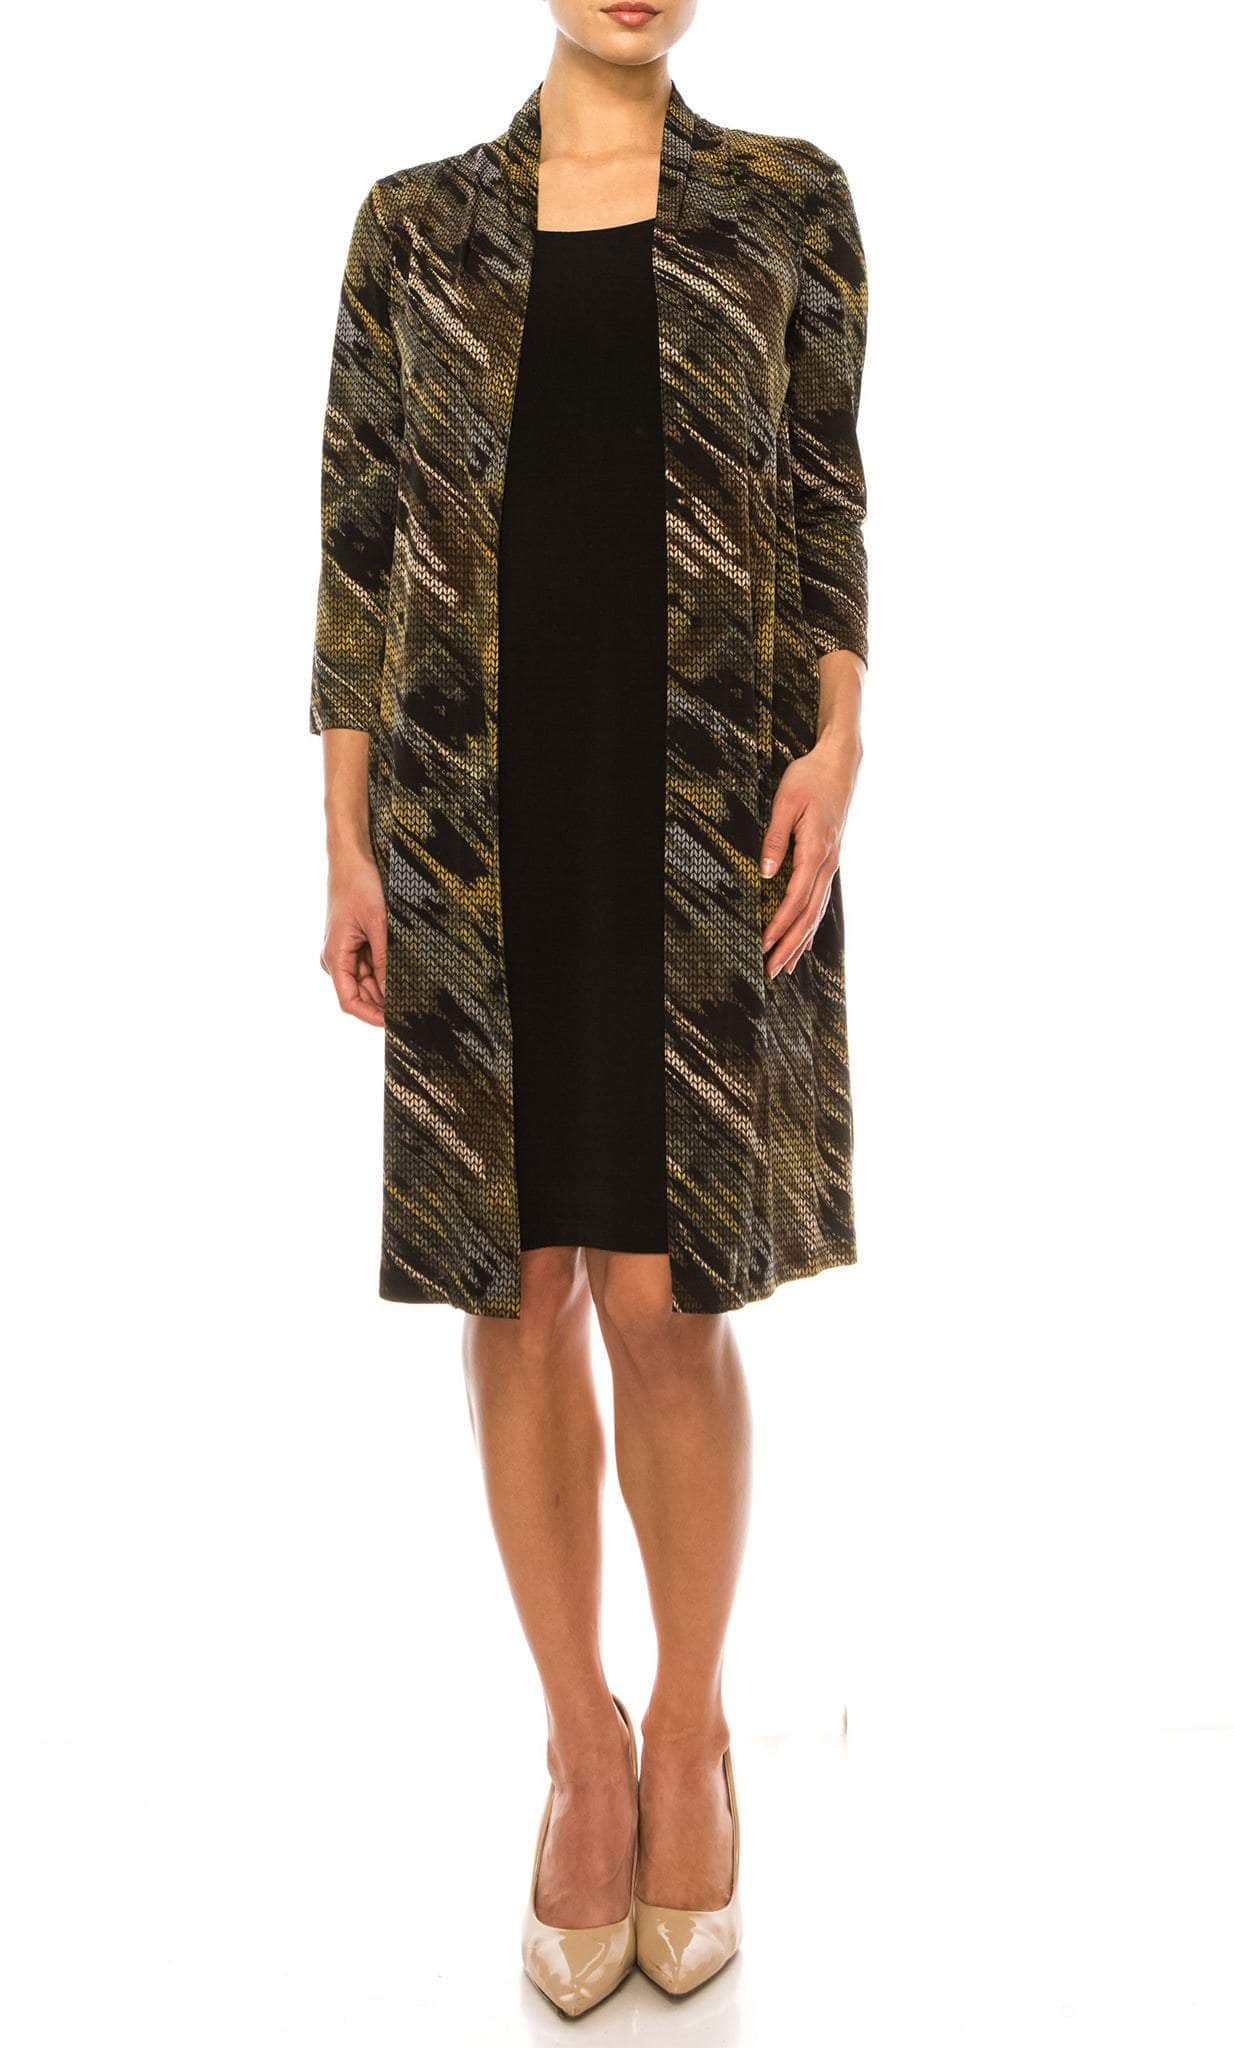 Connected Apparel TGL70975 - Abstract Print Faux Jacket Dress Cocktail Dresses 0 / Moss